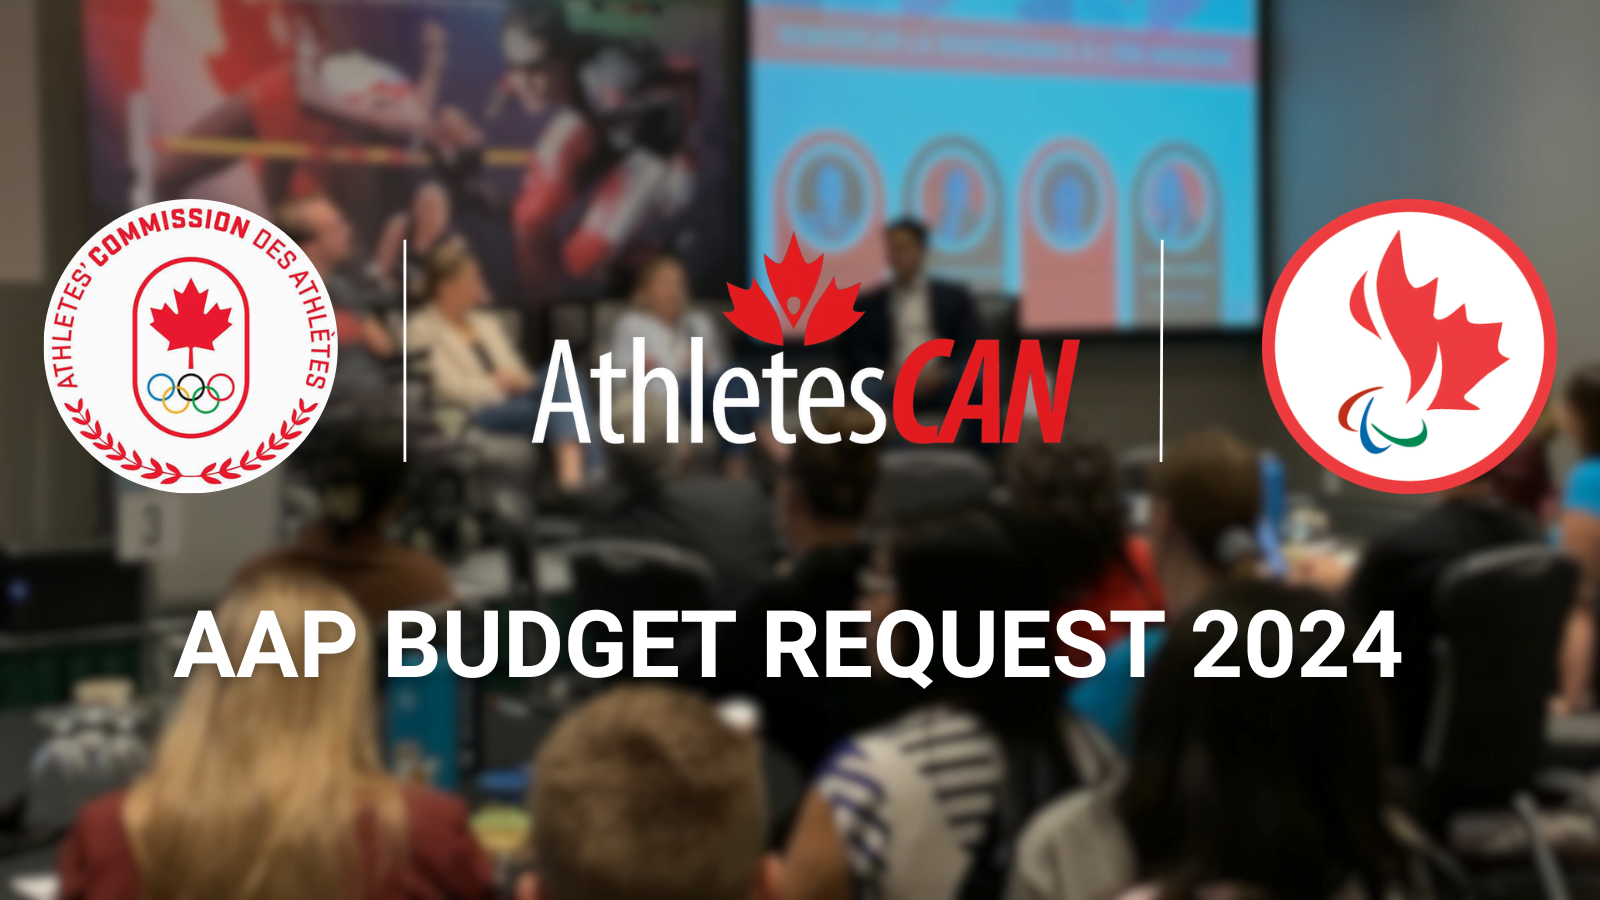 Canadian Athlete Representatives request $6.3 Million increase to Athlete Assistance Program Funding in Budget 2024